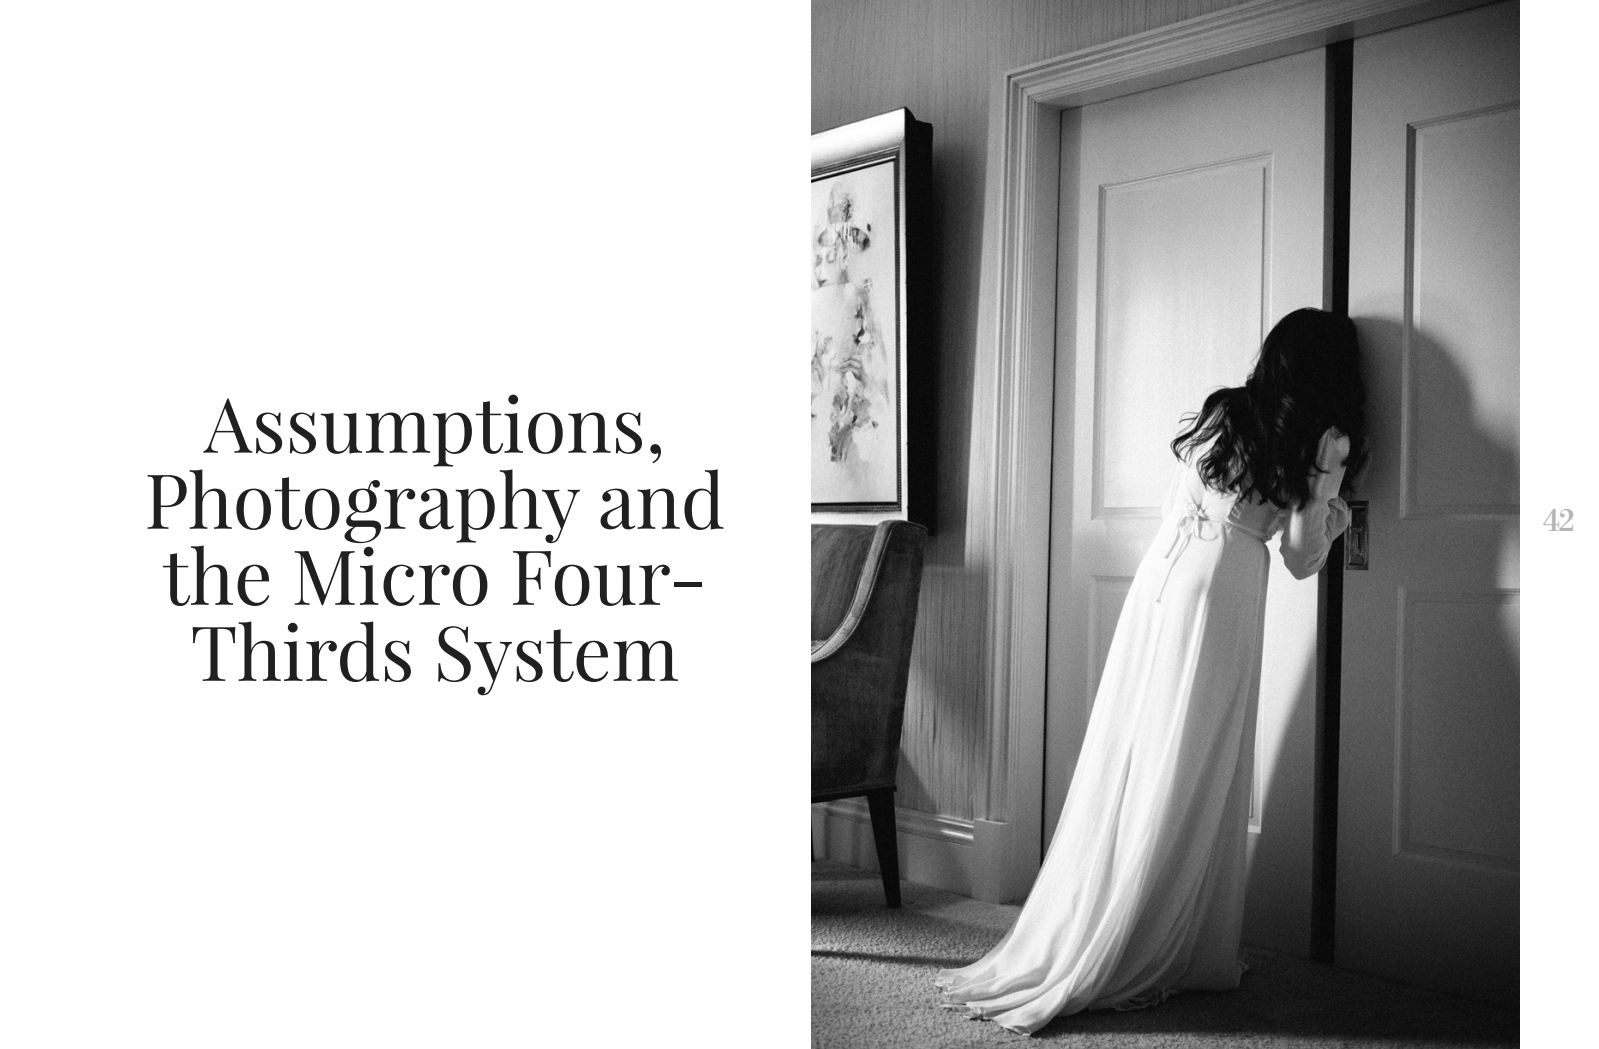 Assumptions, Photography And The Micro Four Thirds System Article In The  Debut Issue Of Olympus Passion Magazine — Bradley Hanson Photography |  Minneapolis/Saint Paul MN wedding photographer | Wedding photography  worldwide since 1999